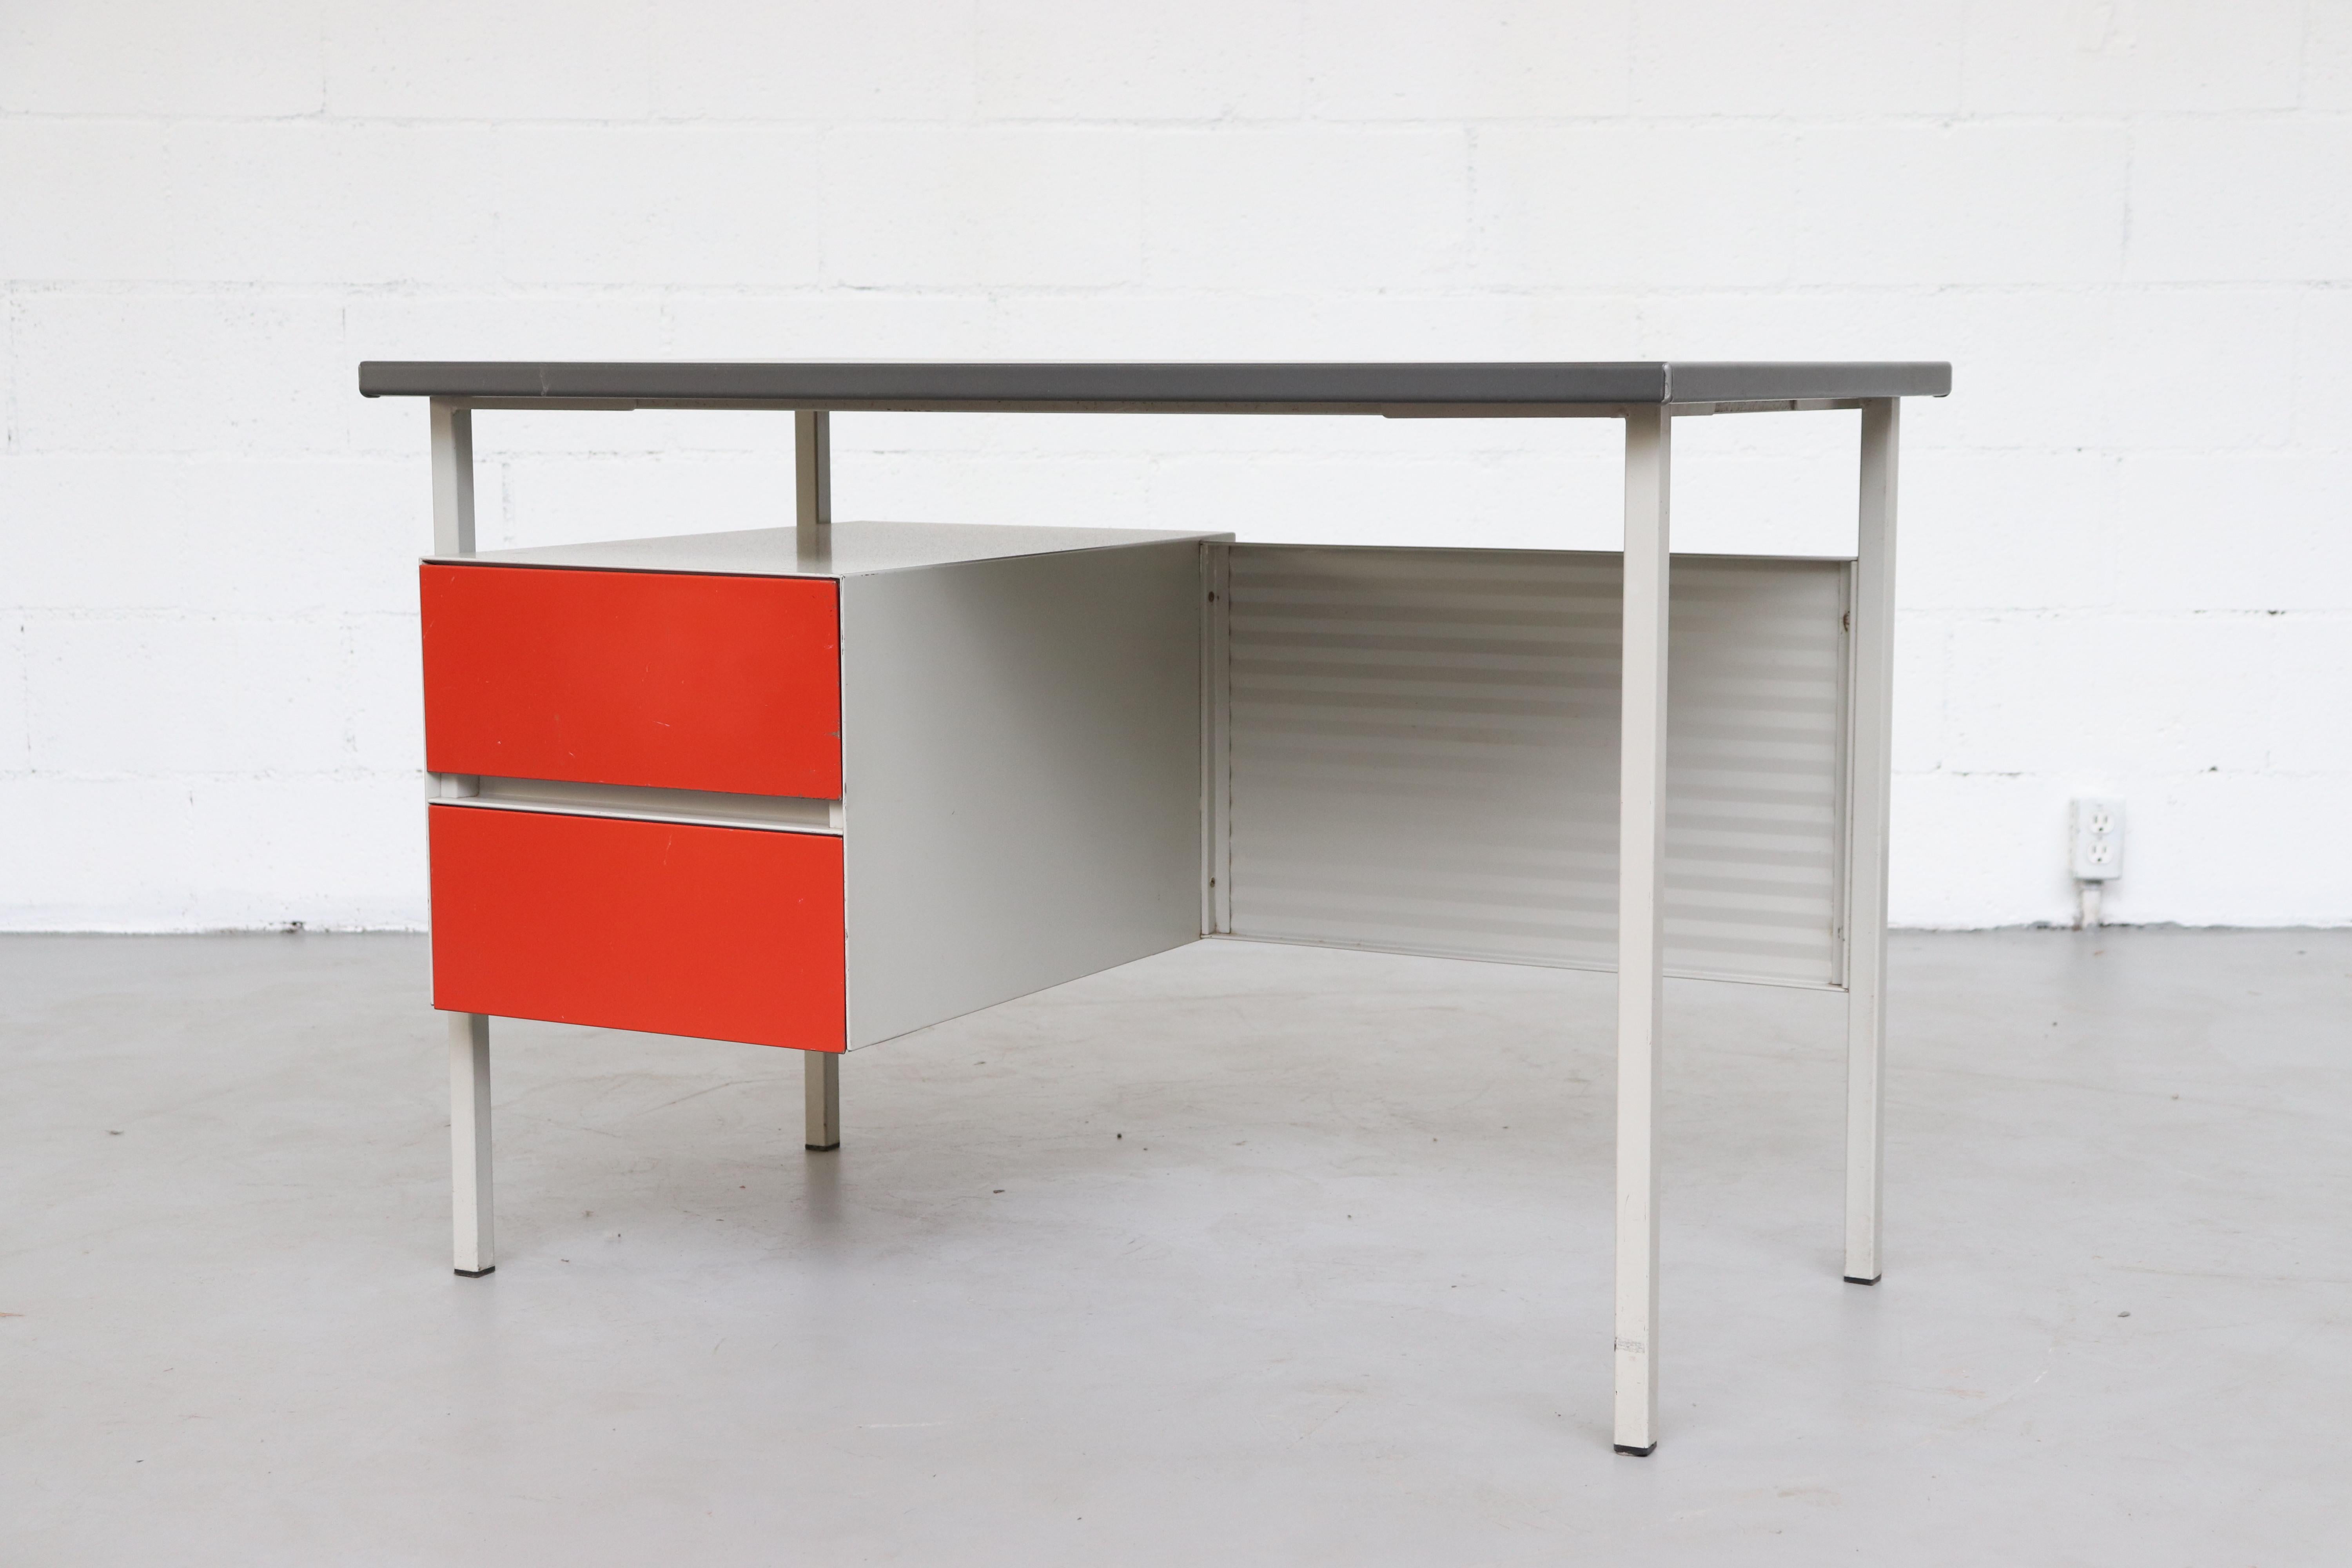 Midcentury Industrial metal desk by A. R. Cordemeyer for Gispen. Light grey enameled metal desk with corrugated metal privacy screen, red enameled metal drawers and grey linoleum top. Visible wear, some scratching and metal loss. Wear is consistent